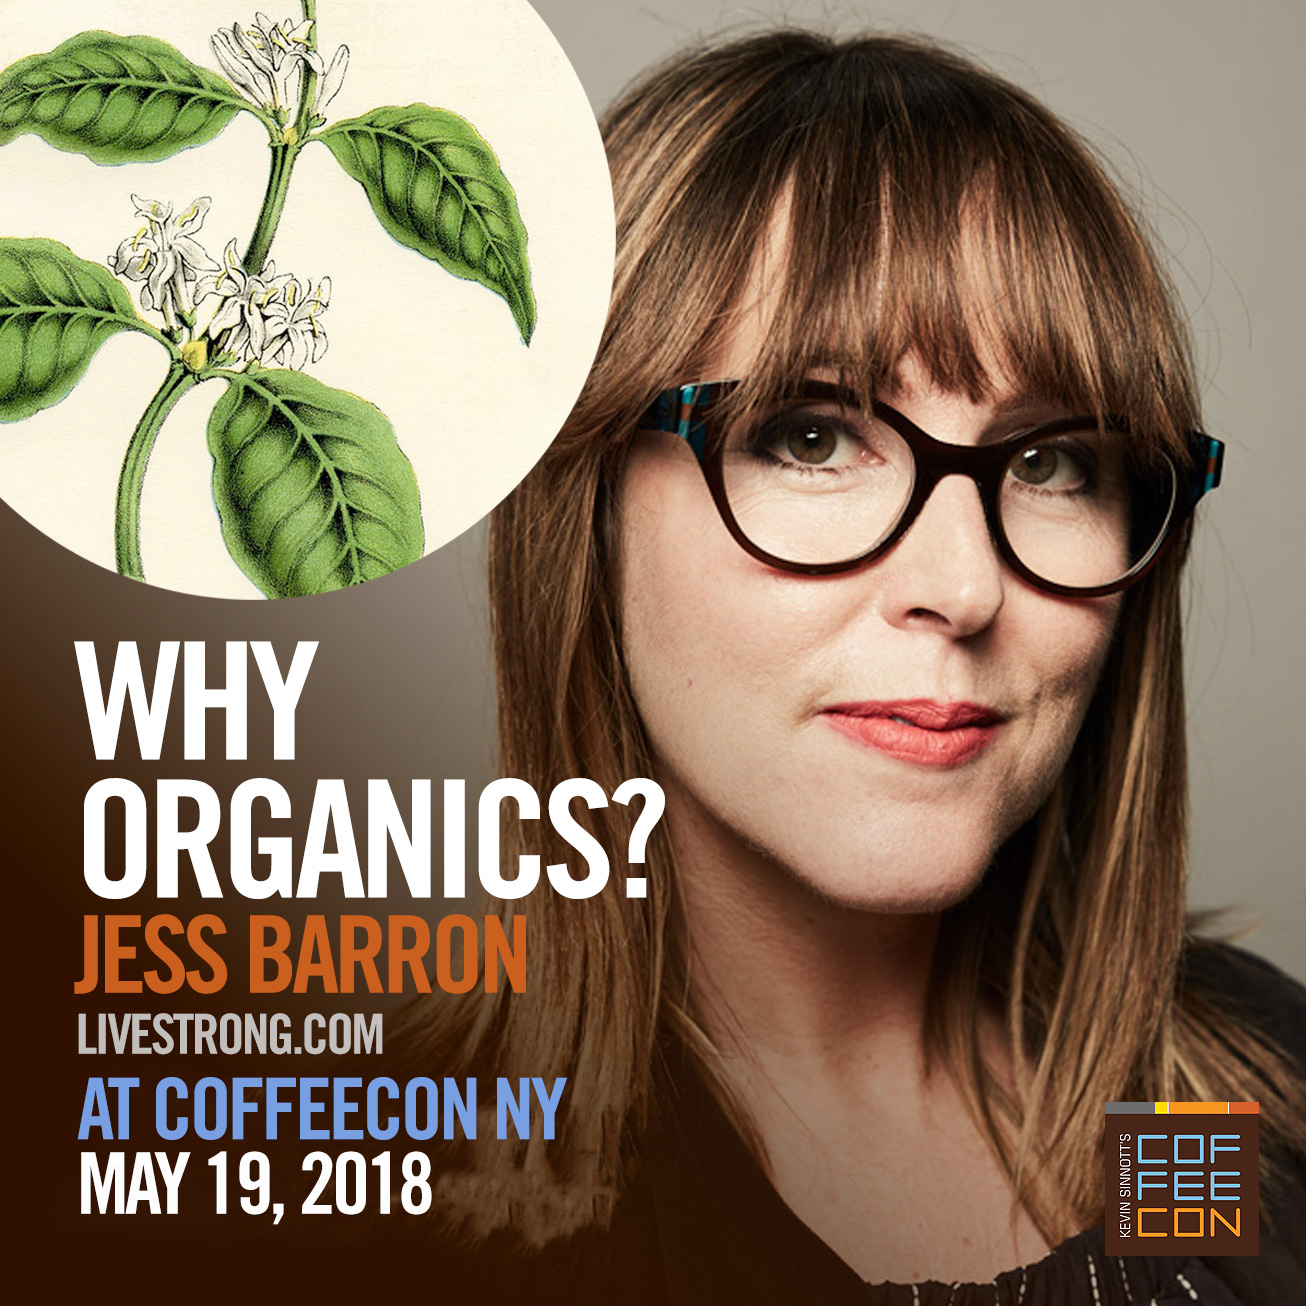 Why Organics with Jess Barron at CoffeeConNY